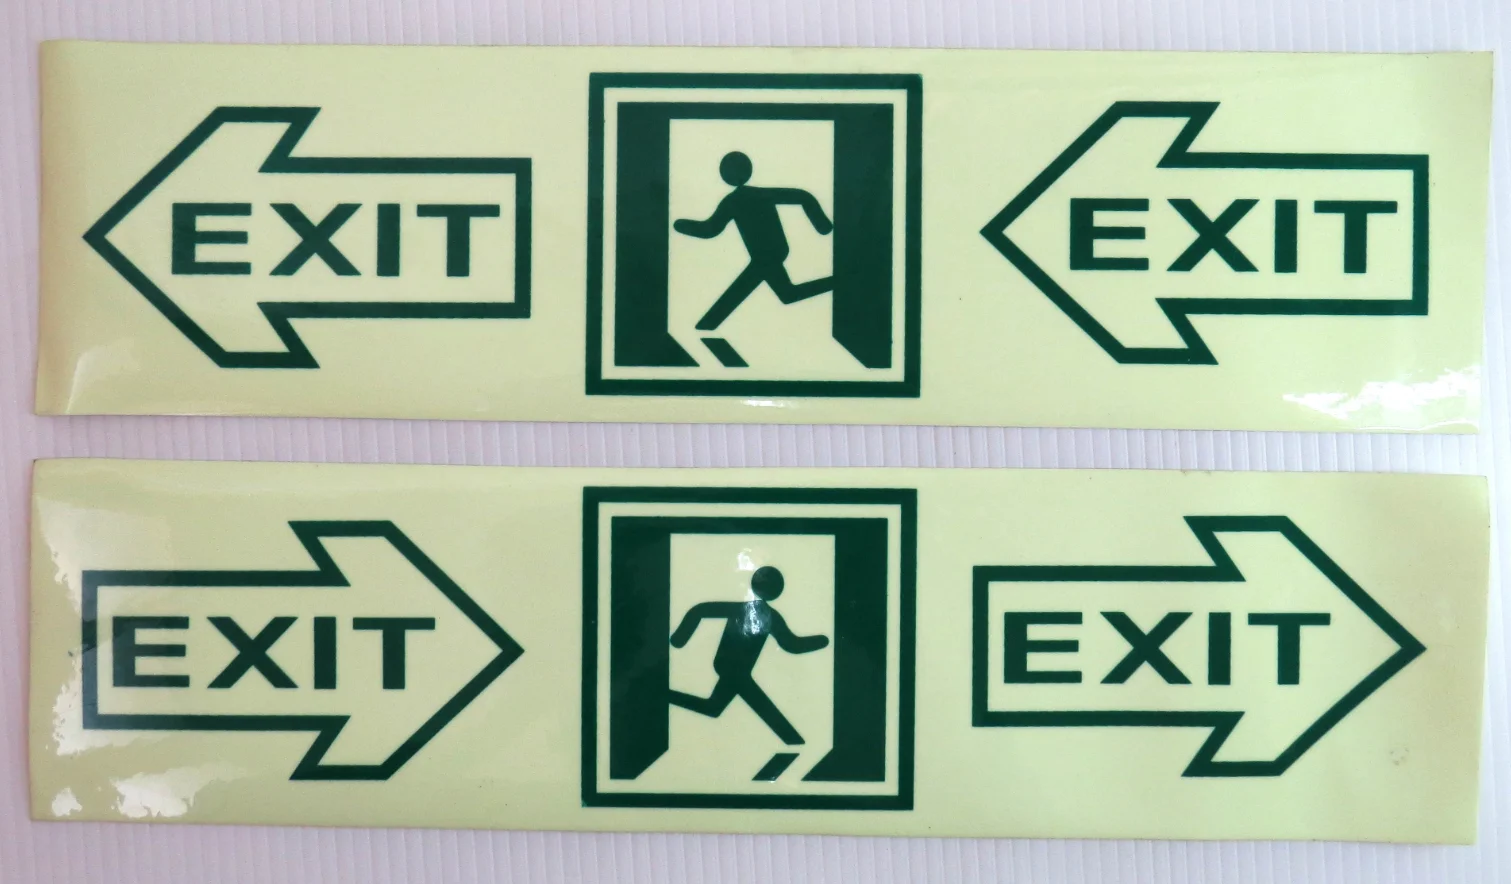 Adhesive durable customized luminous 6-12h labels signboard waterproof warning label stair floor exit signs pet stickers